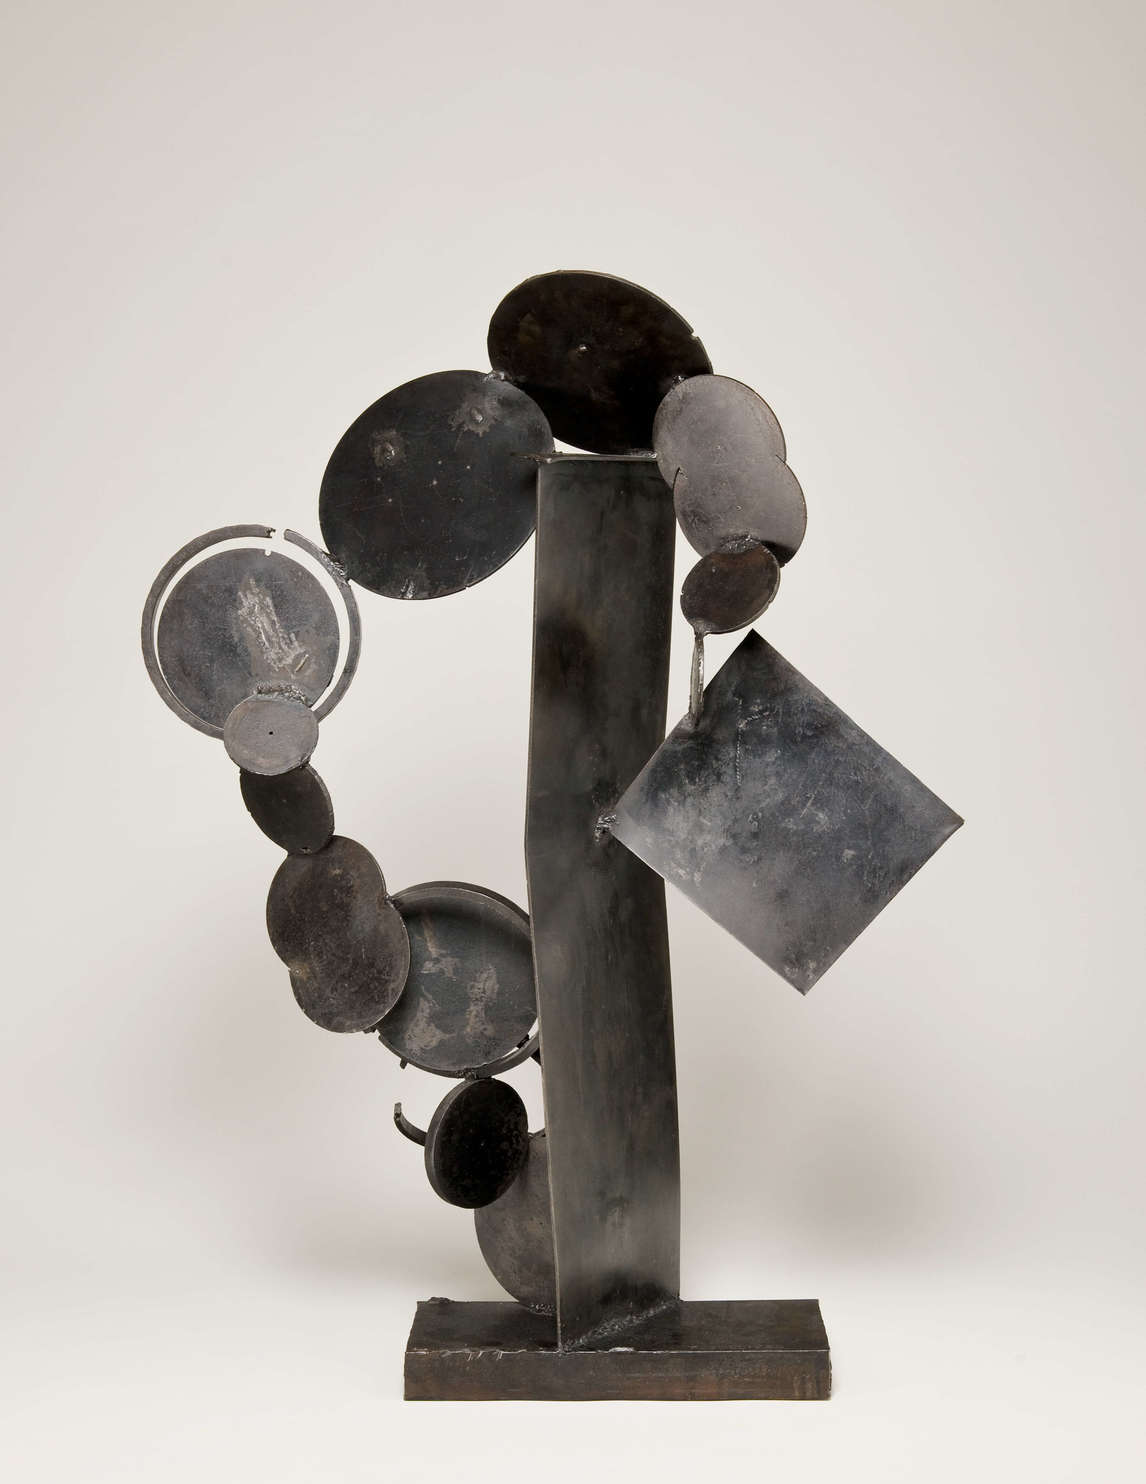 Concentric Fall, 1962, by Françoise Sullivan.